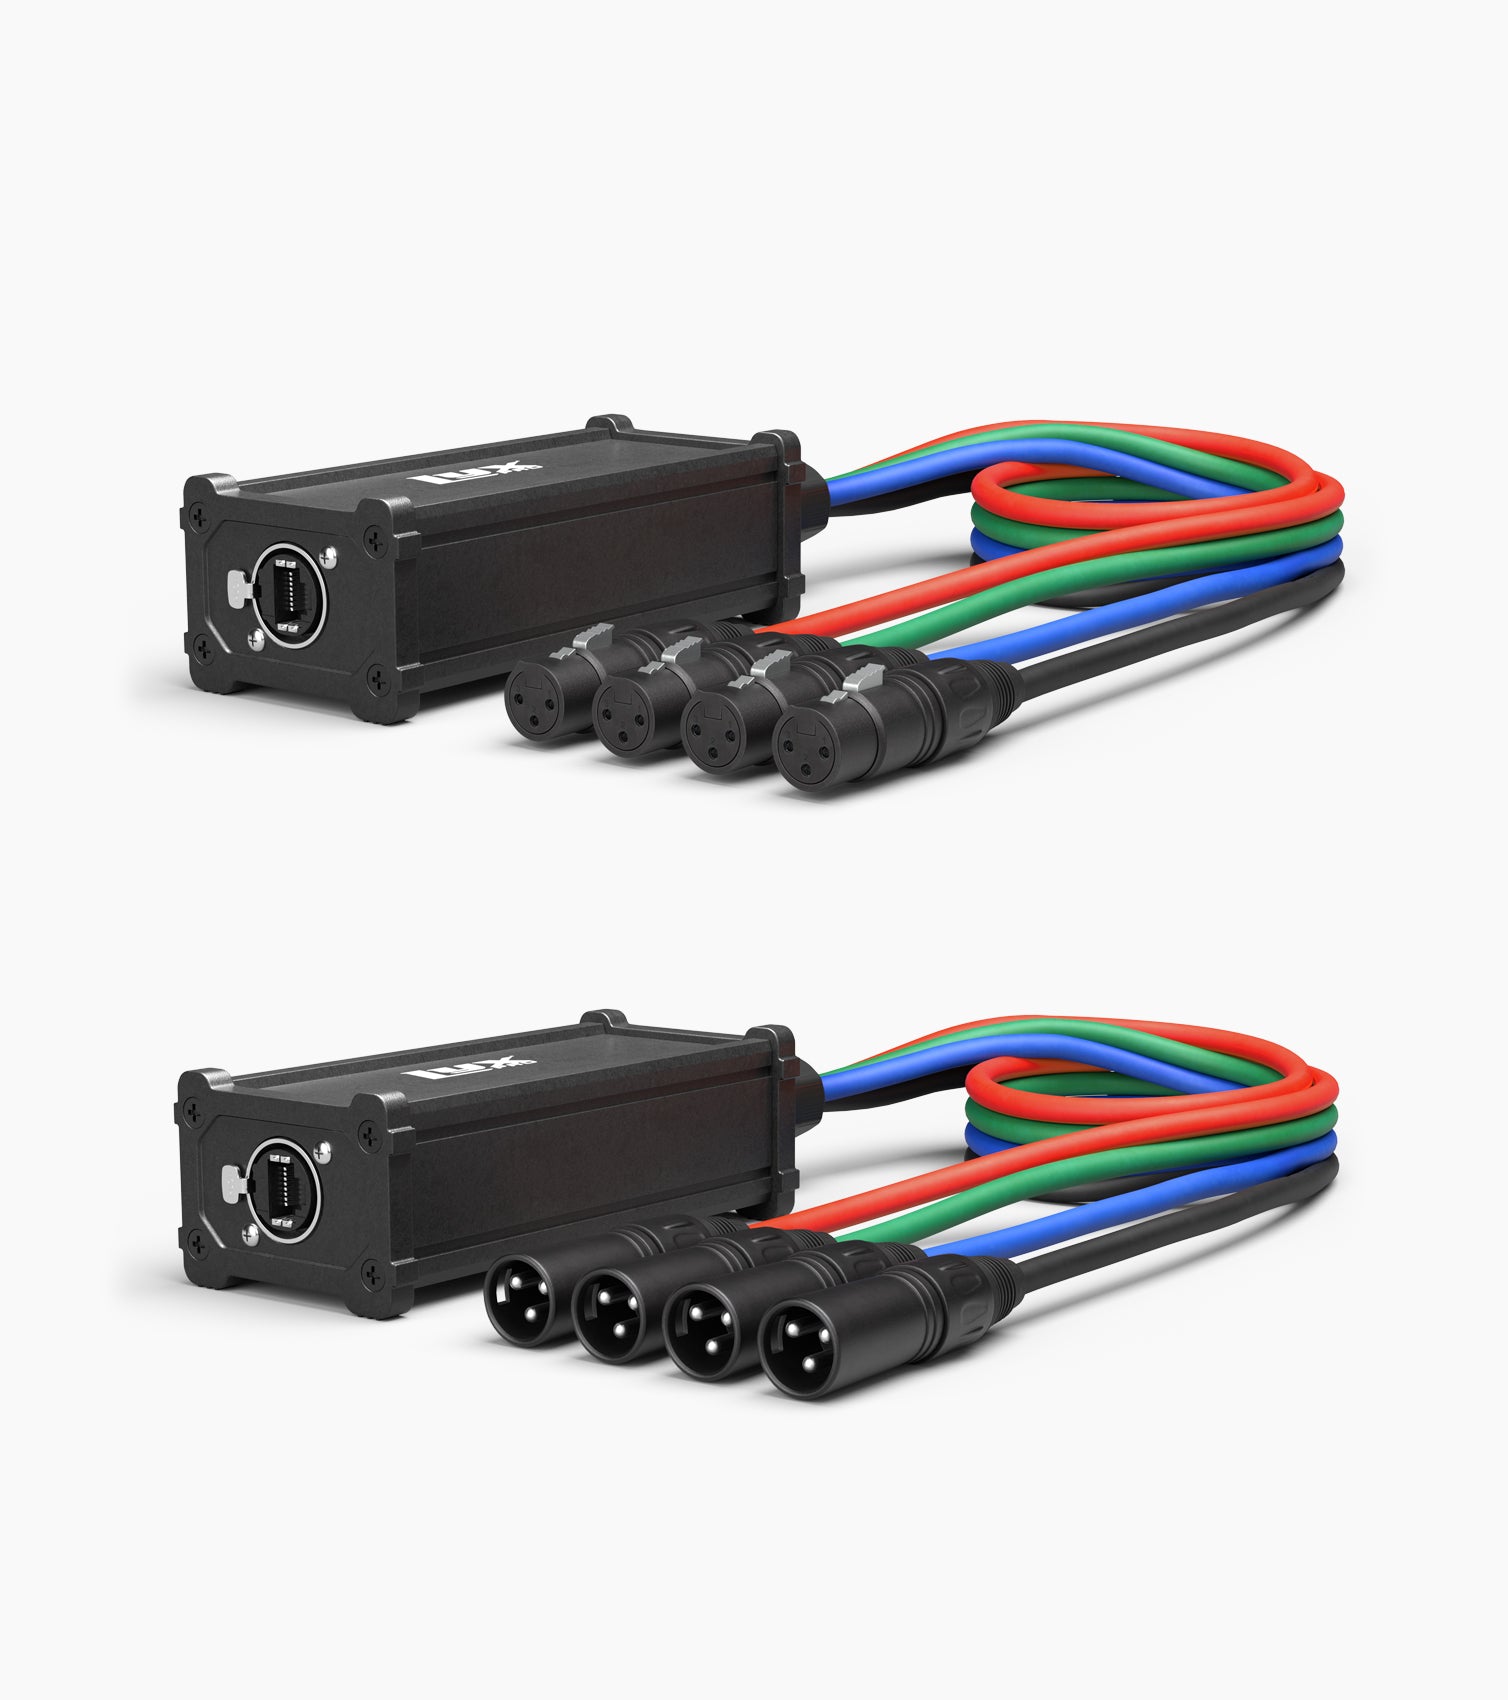 LyxPro 4-Channel XLR to Cat6 Network Cables - Hero image